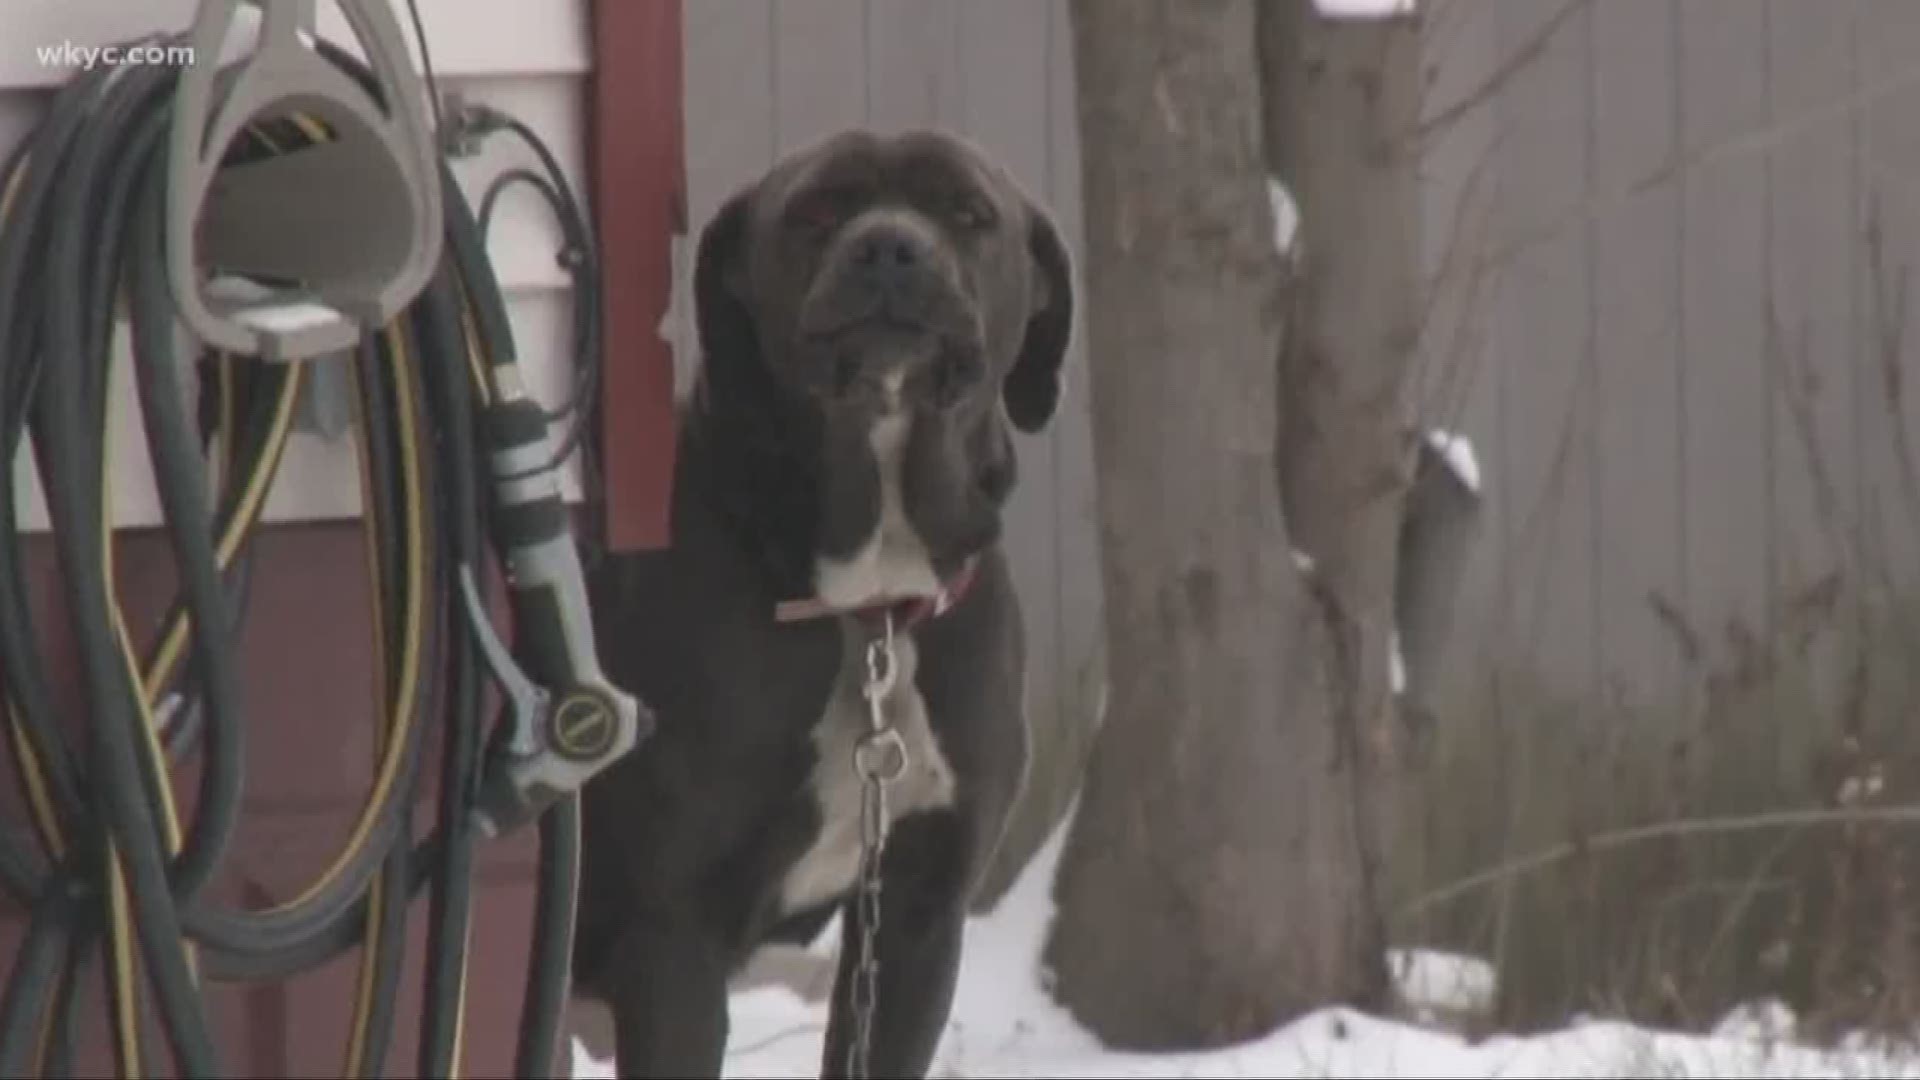 Tips for keeping your pets safe during the wintry weather